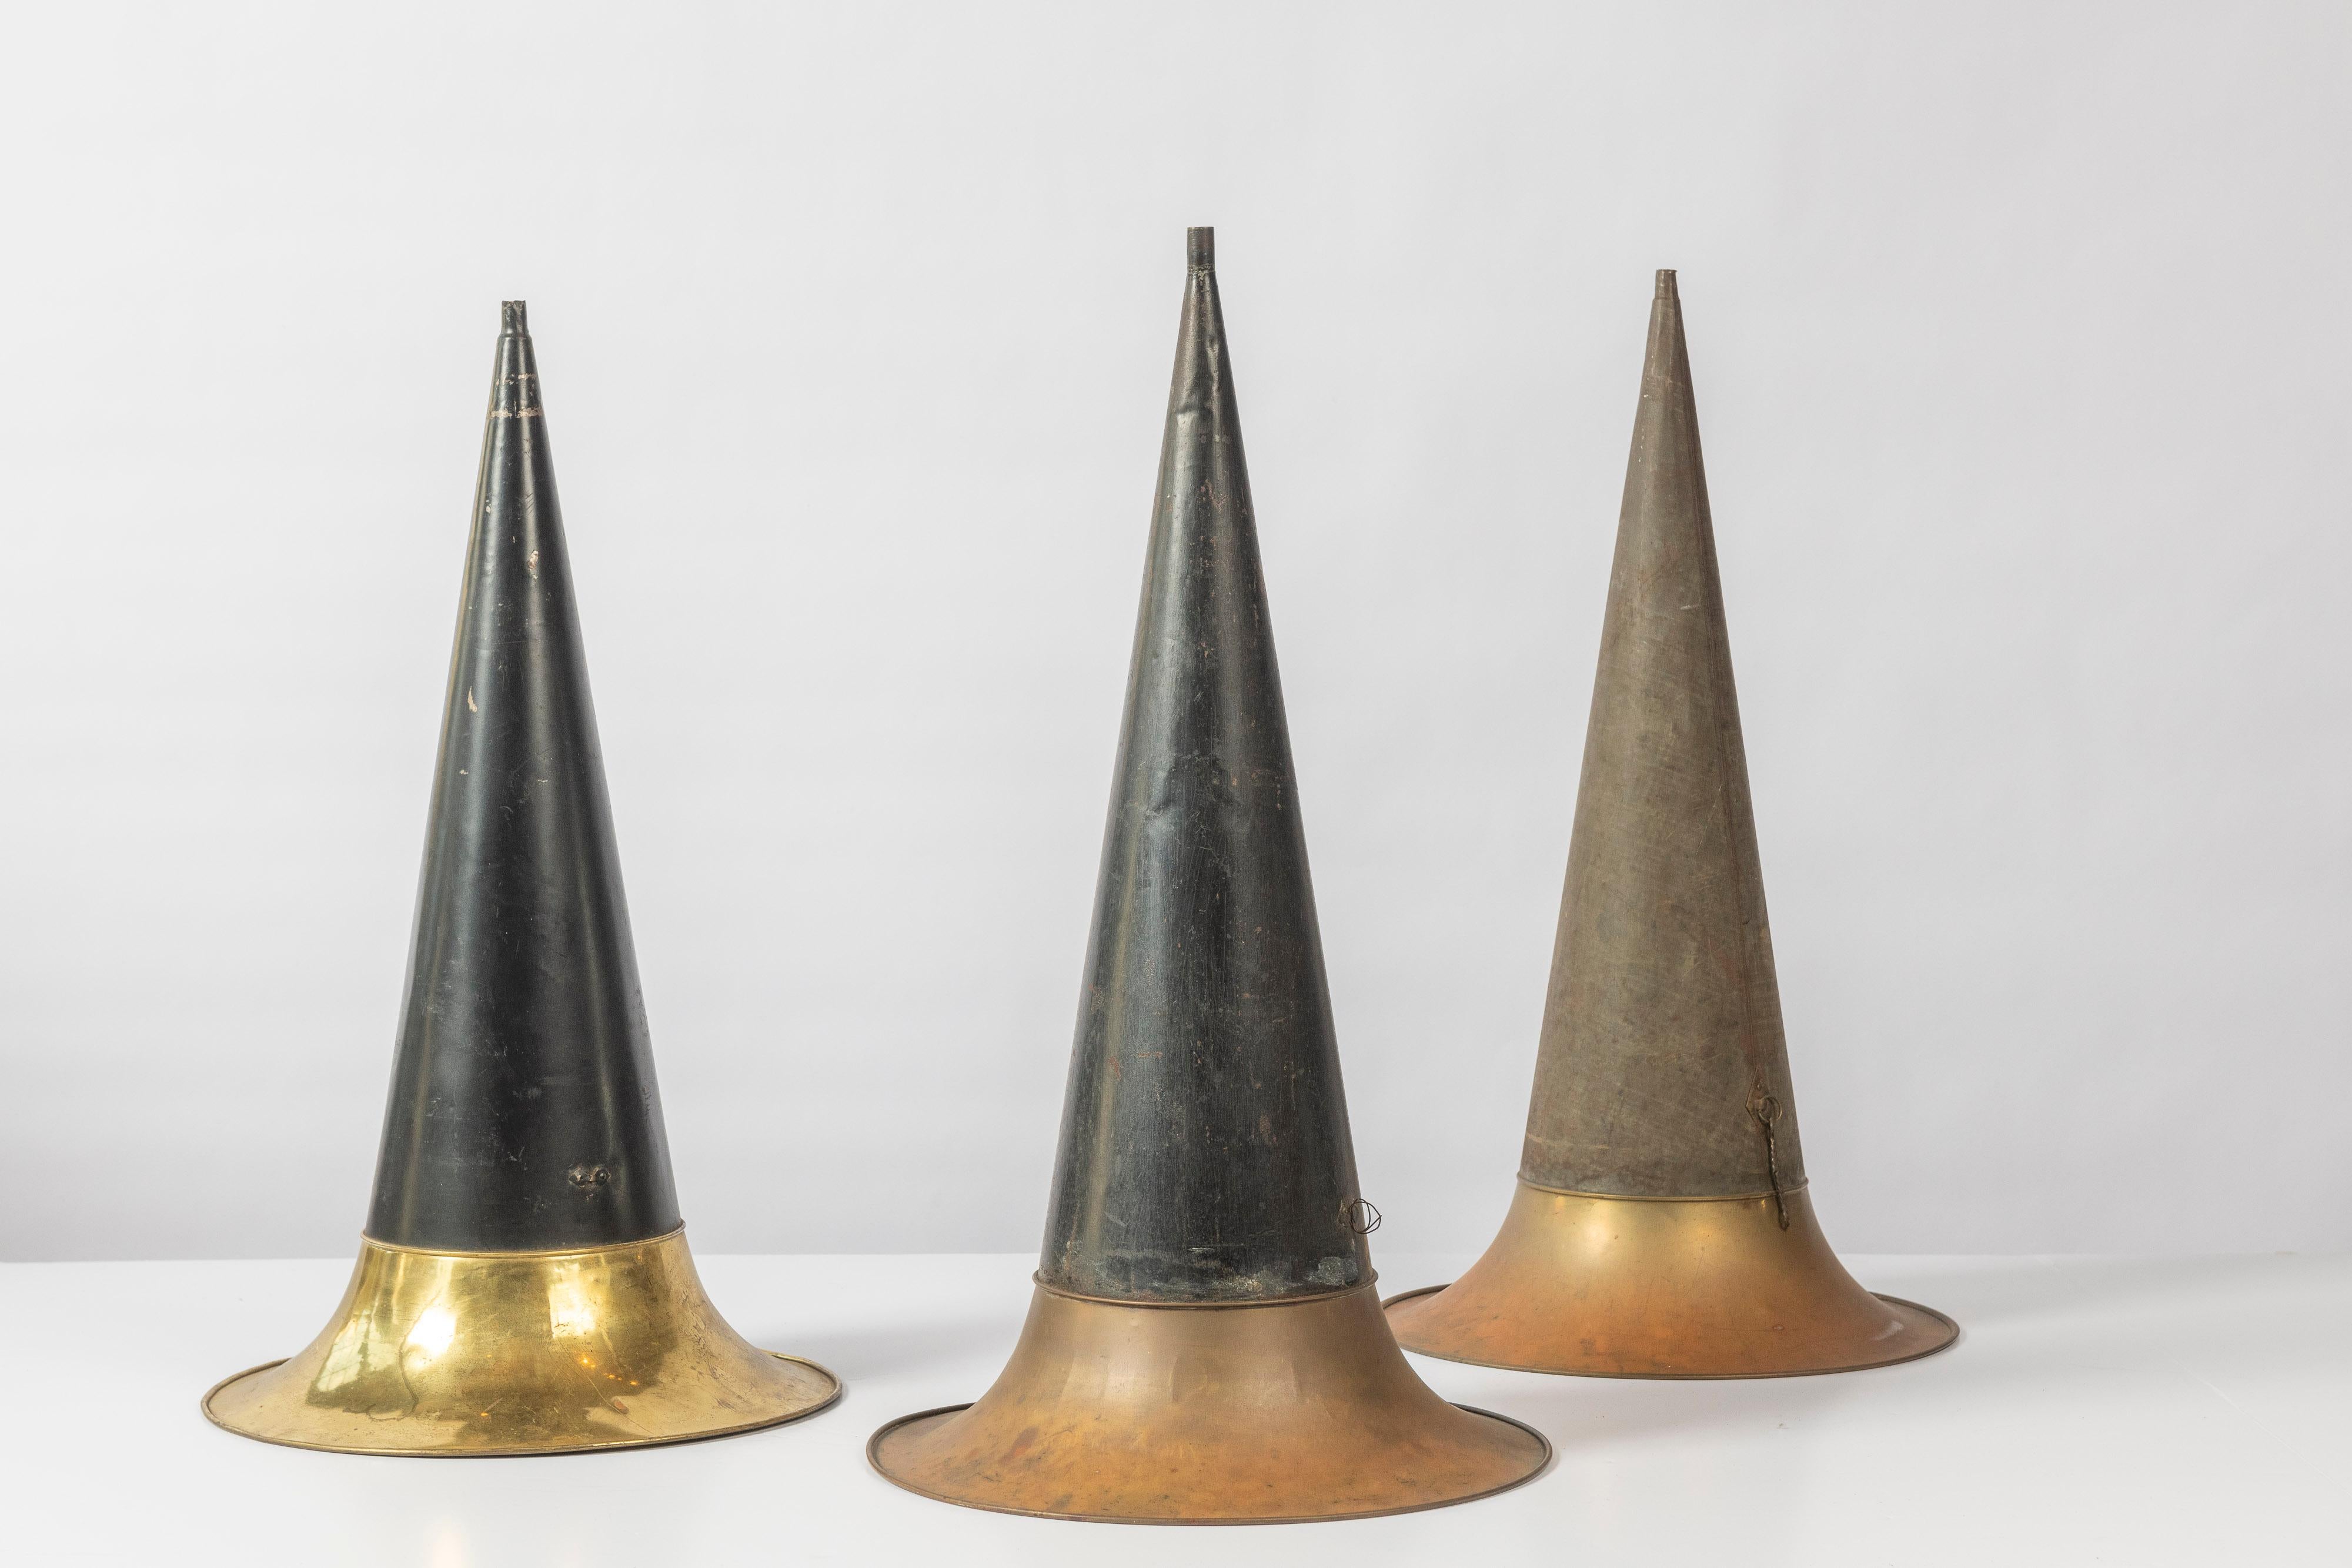 Three antique exterior phonograph horns attributed to Victrola, likely from a Victor Talking Machine. We have three available which can be sold individually or as a set. Add an interesting addition to your music room, library or den.

Kindly